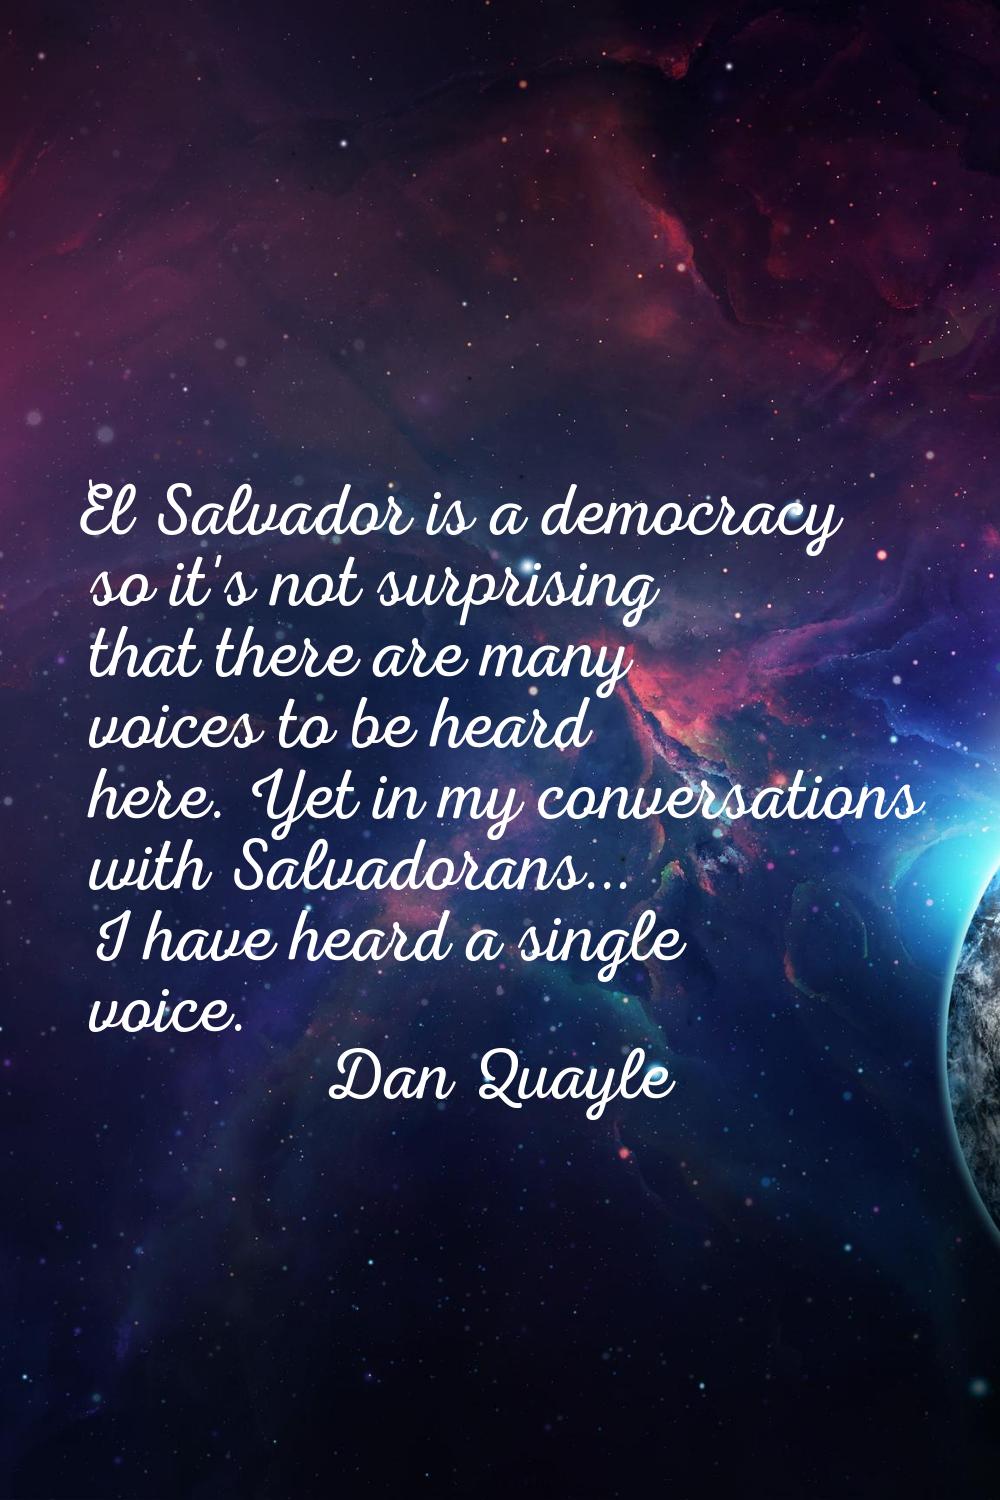 El Salvador is a democracy so it's not surprising that there are many voices to be heard here. Yet 